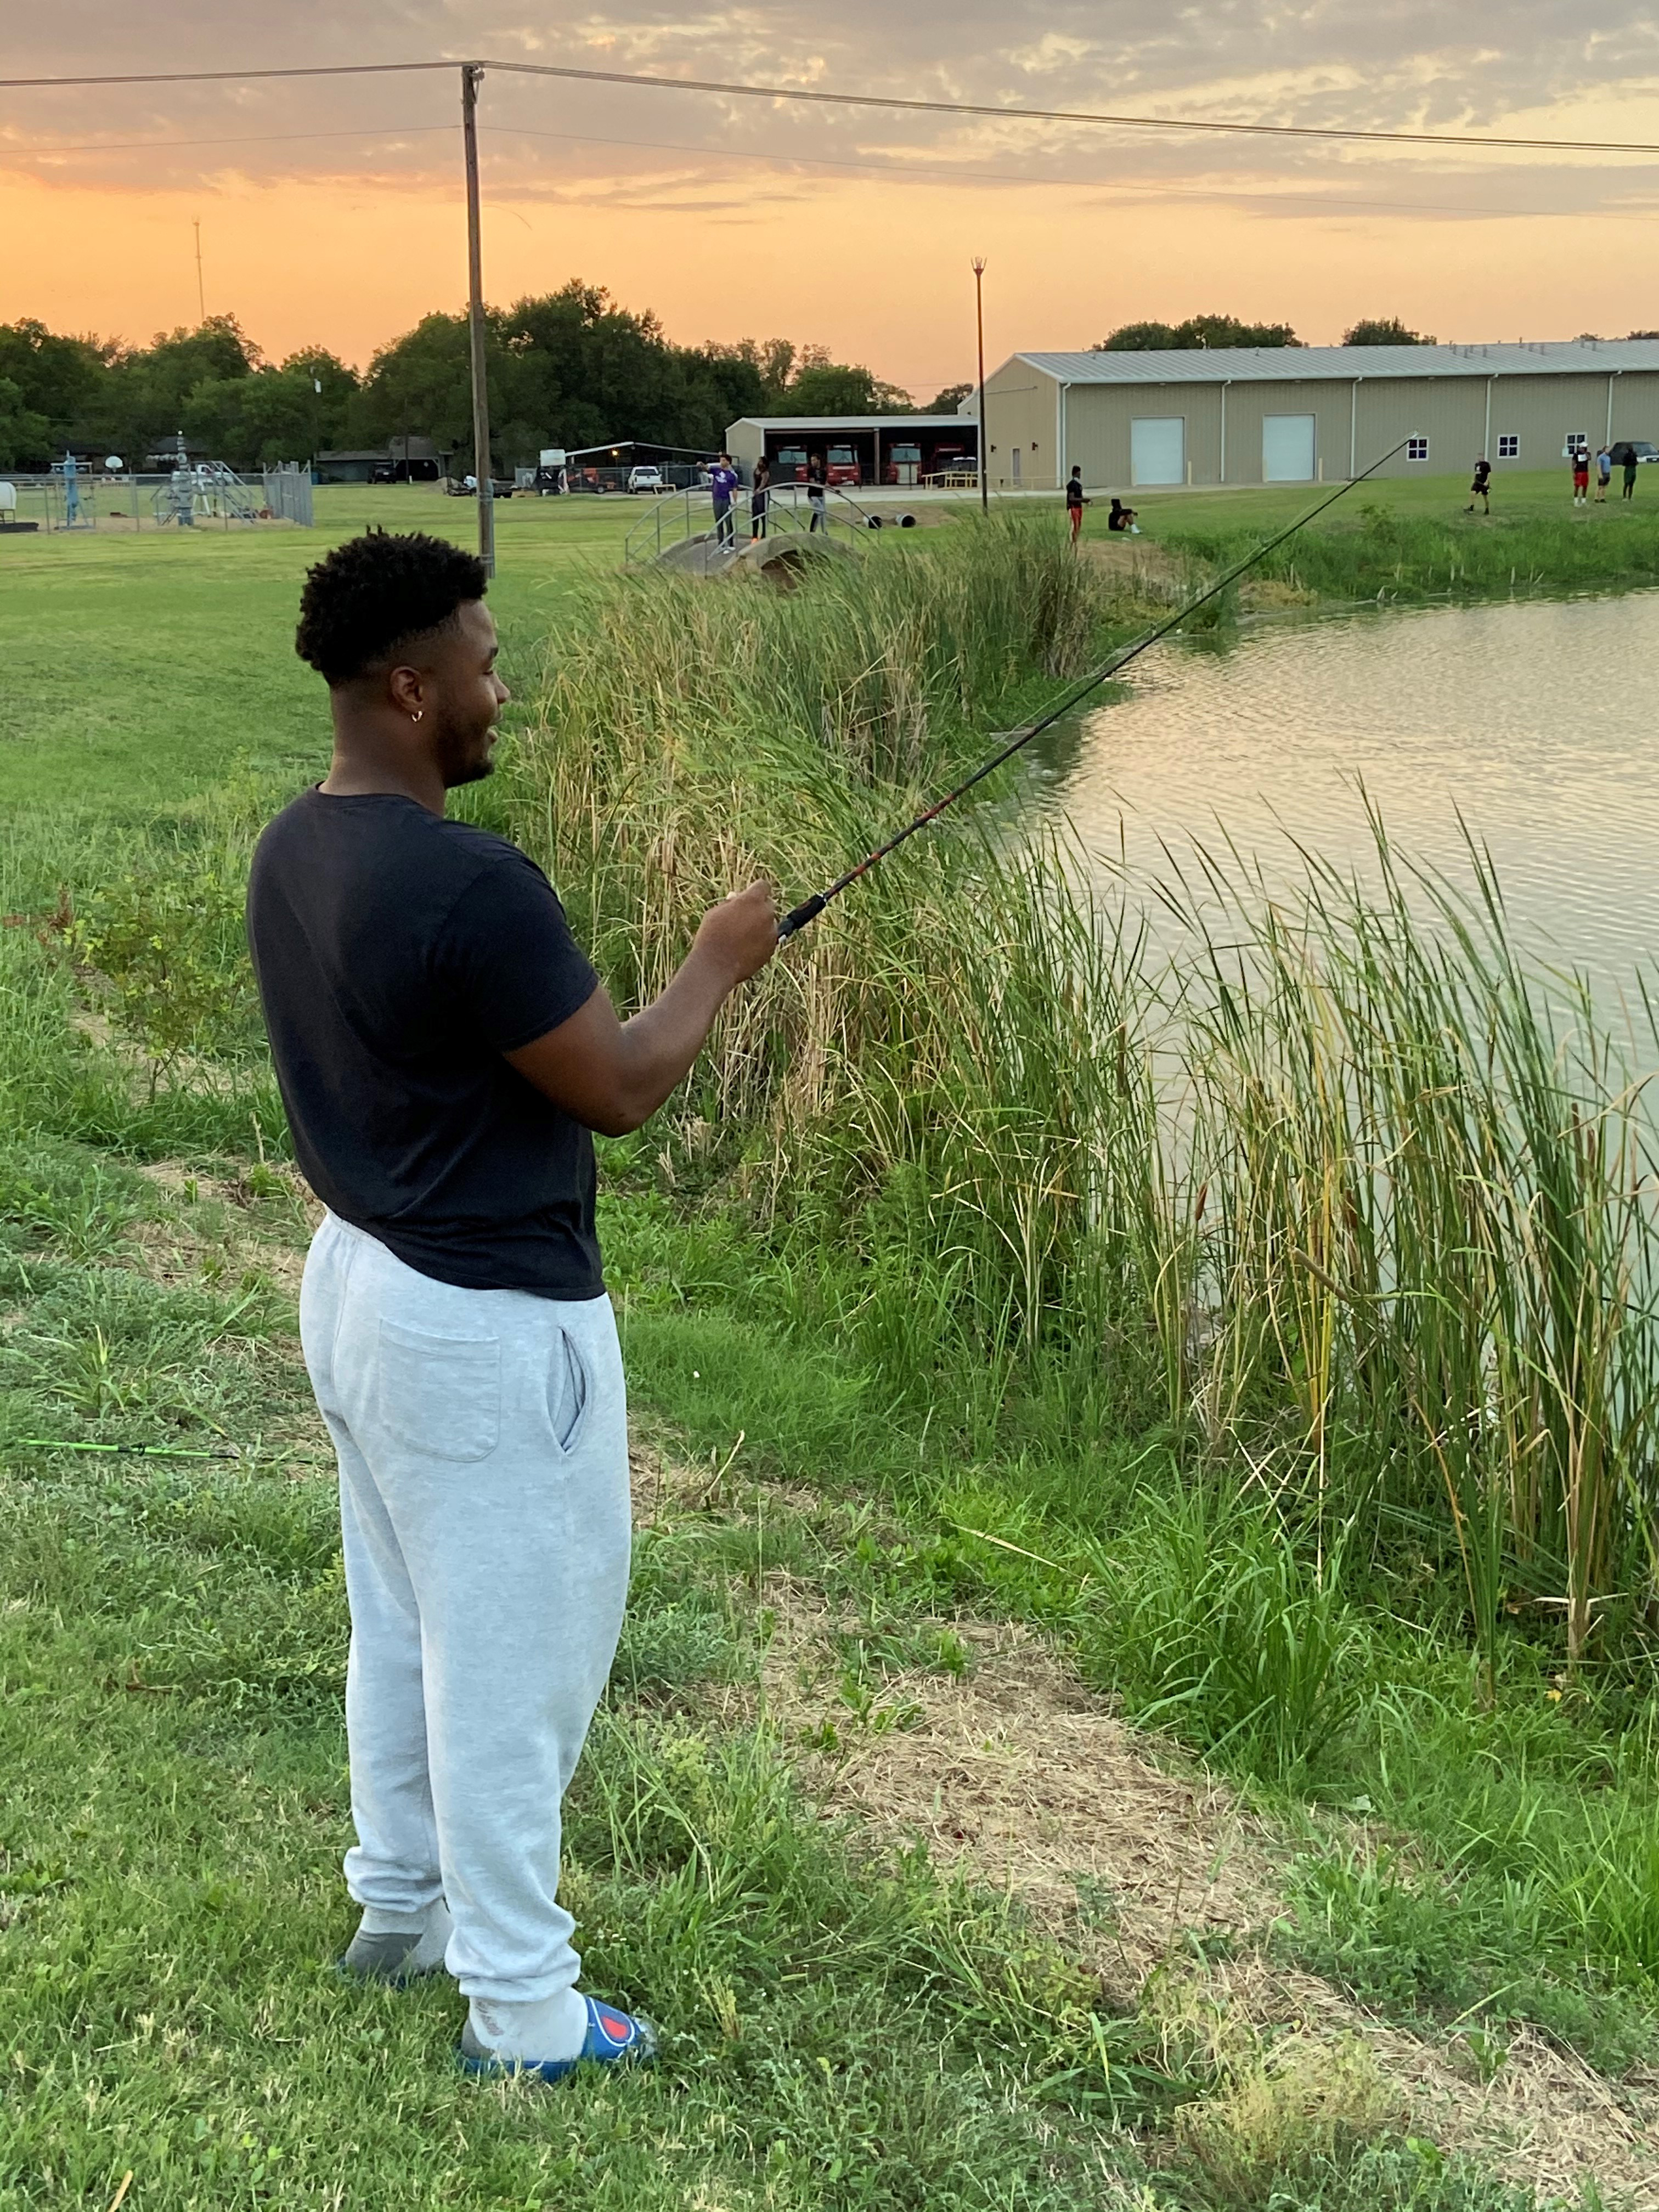 Student at the Fishing Spot